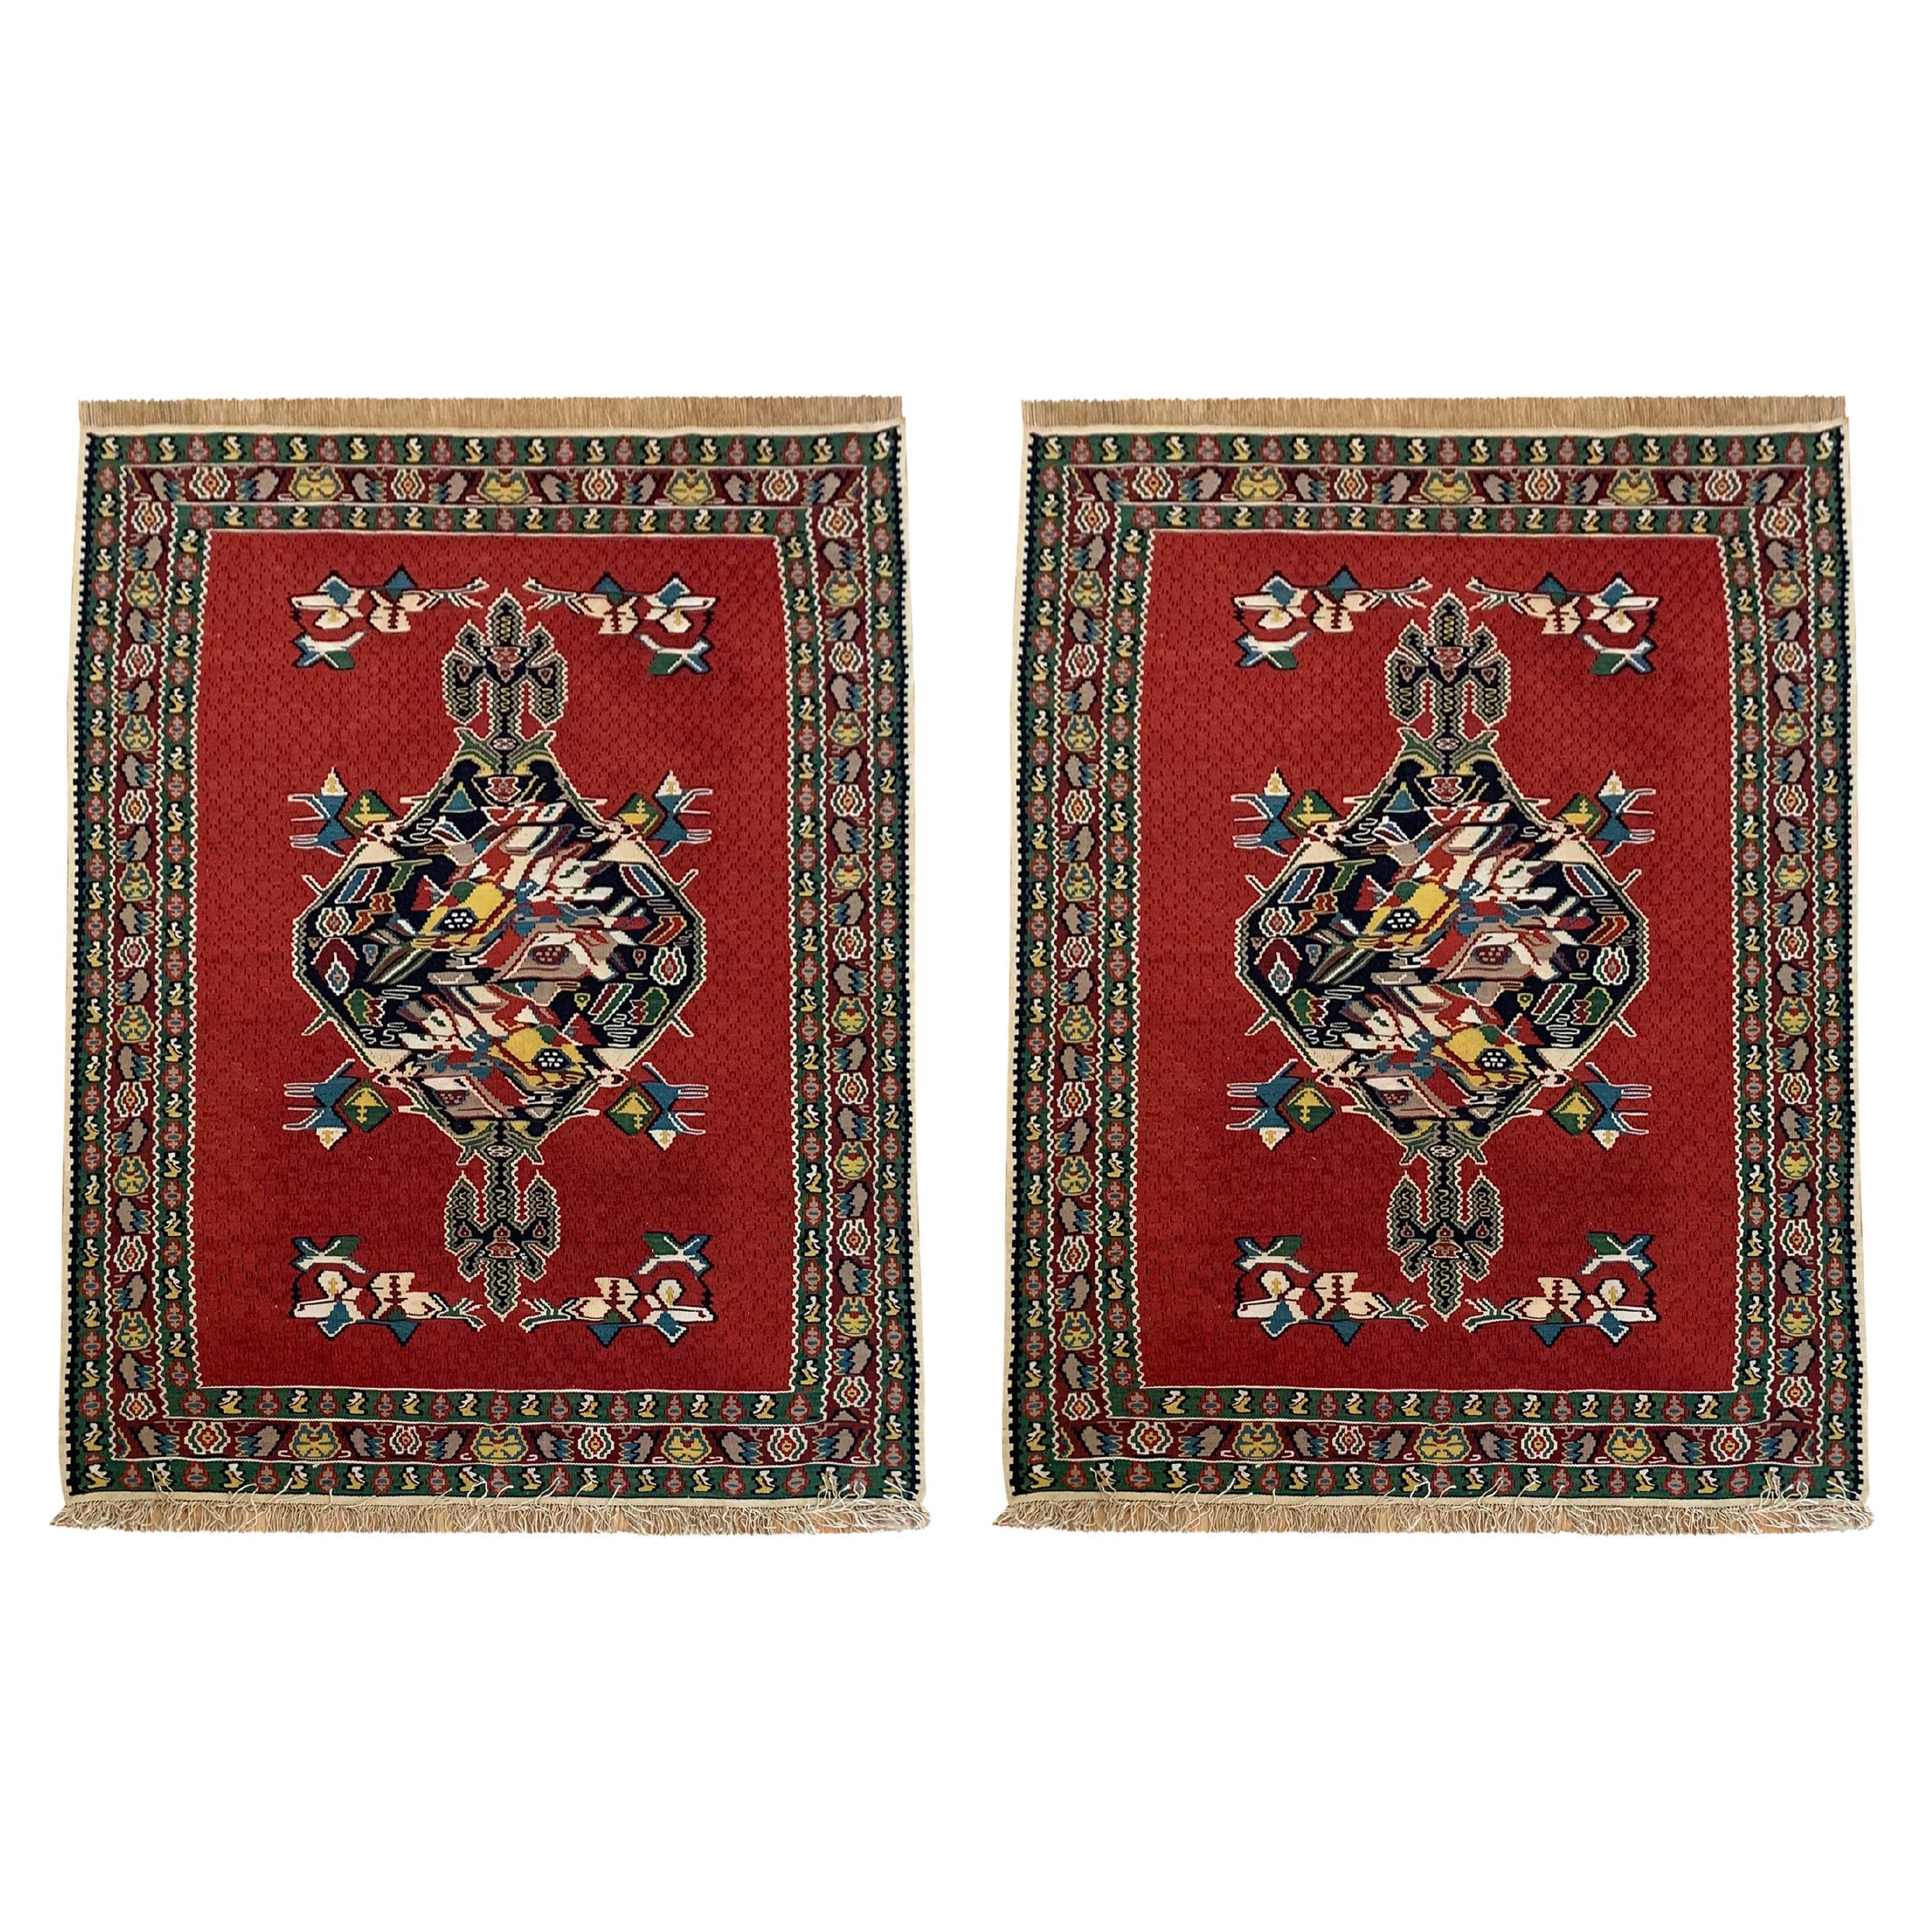 Pair of Red Silk and Wool Kilim Rugs Handmade Geometric Area Rugs For Sale